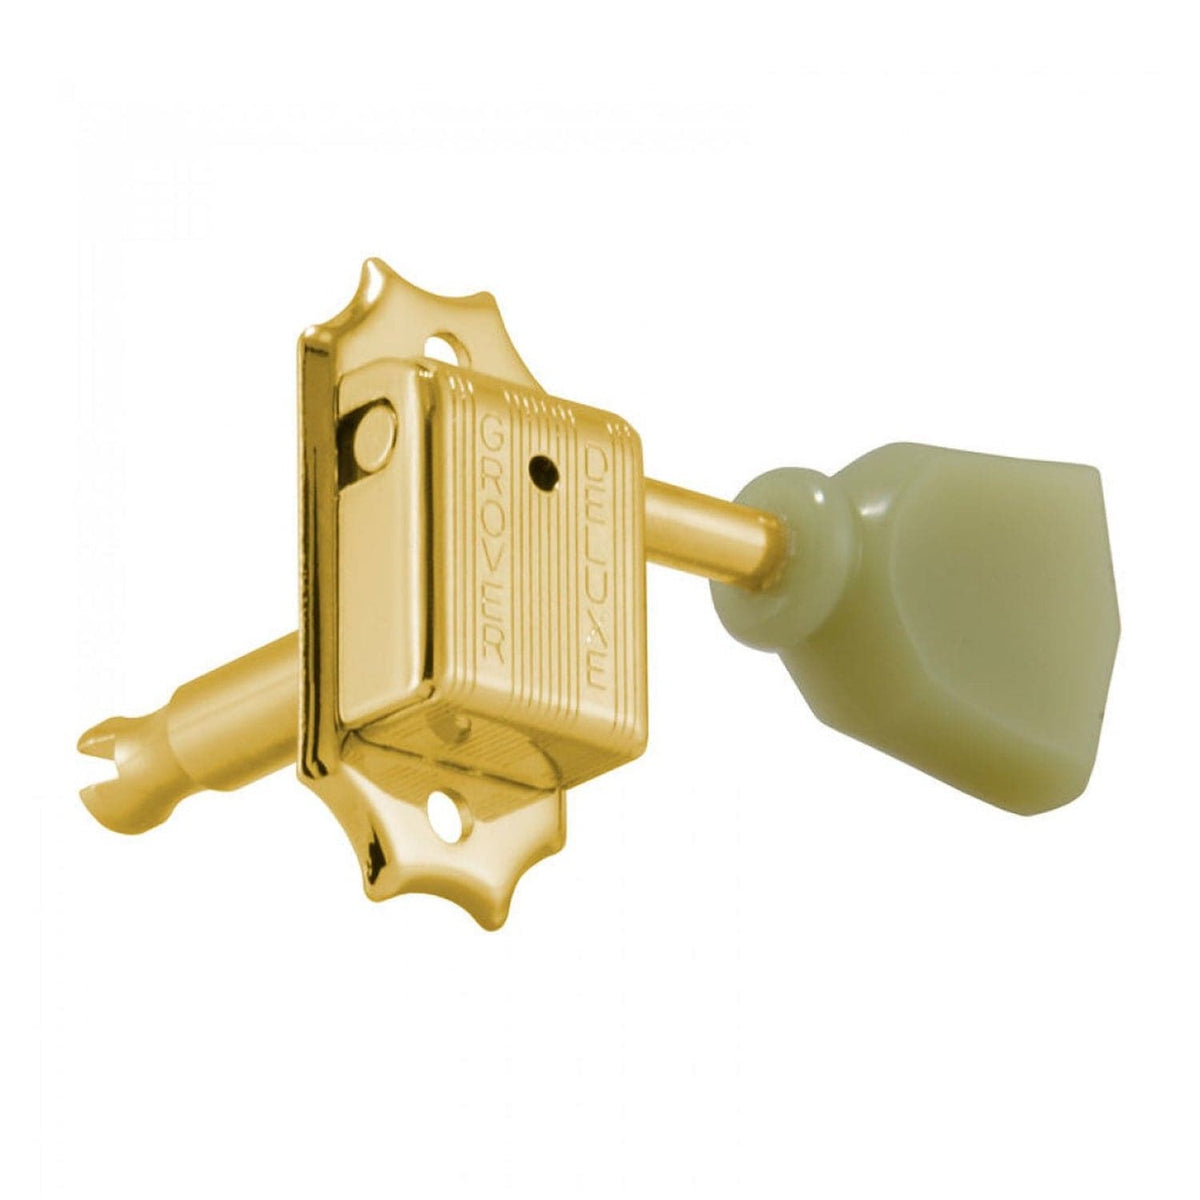 Grover Deluxe 133GK Keystone Machine Heads - 3 a Side - Gold